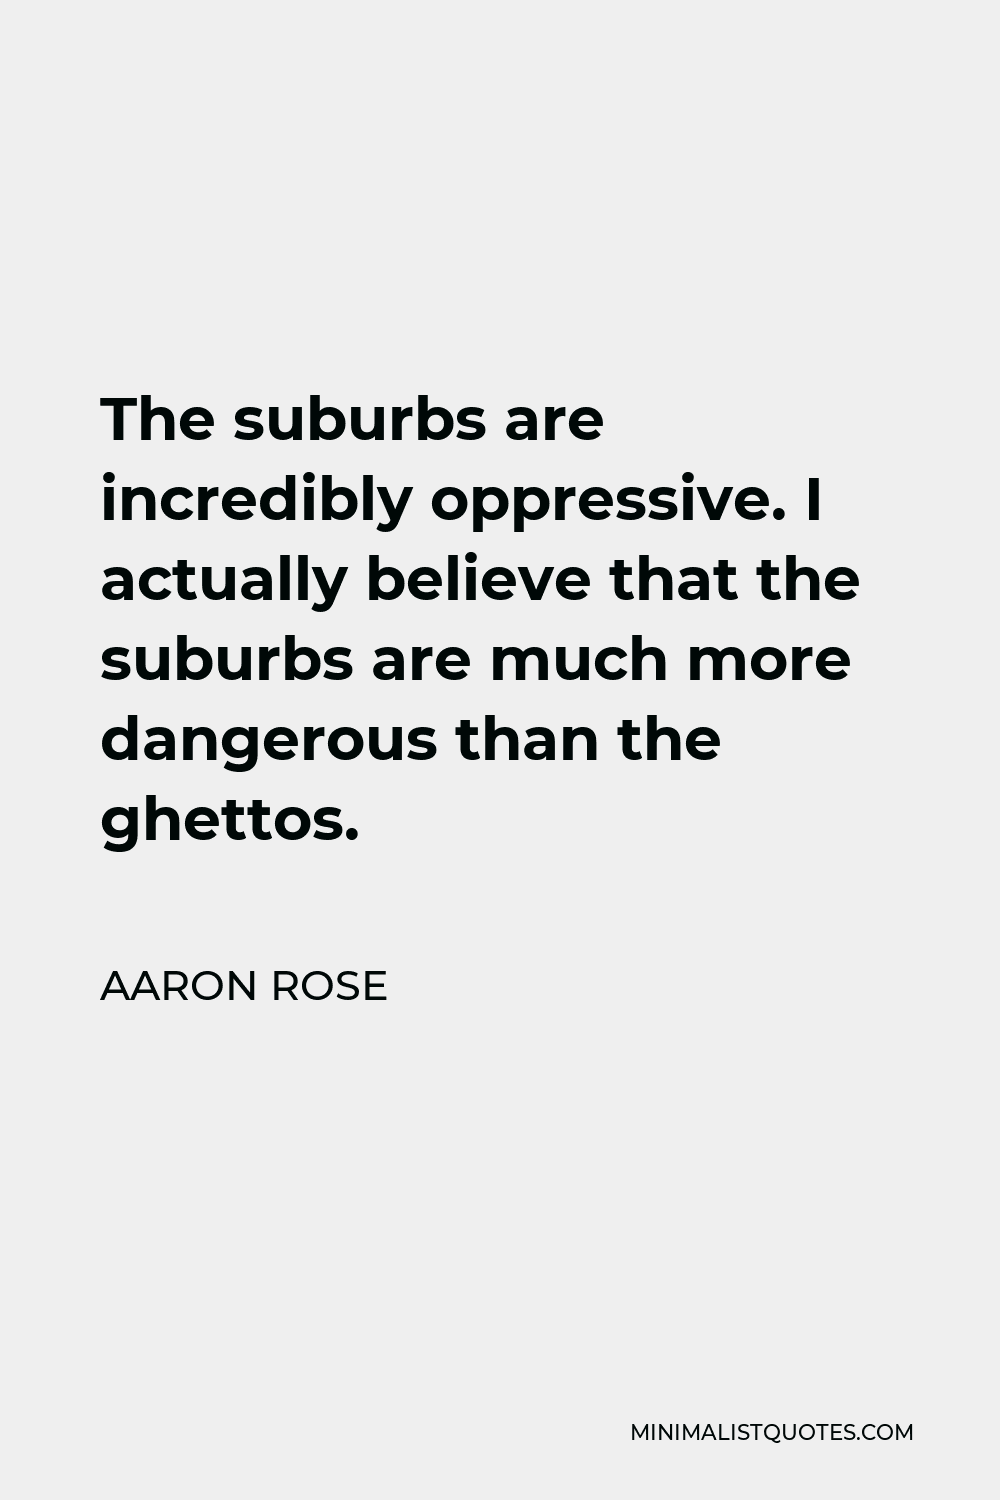 Aaron Rose Quote - The suburbs are incredibly oppressive. I actually believe that the suburbs are much more dangerous than the ghettos.